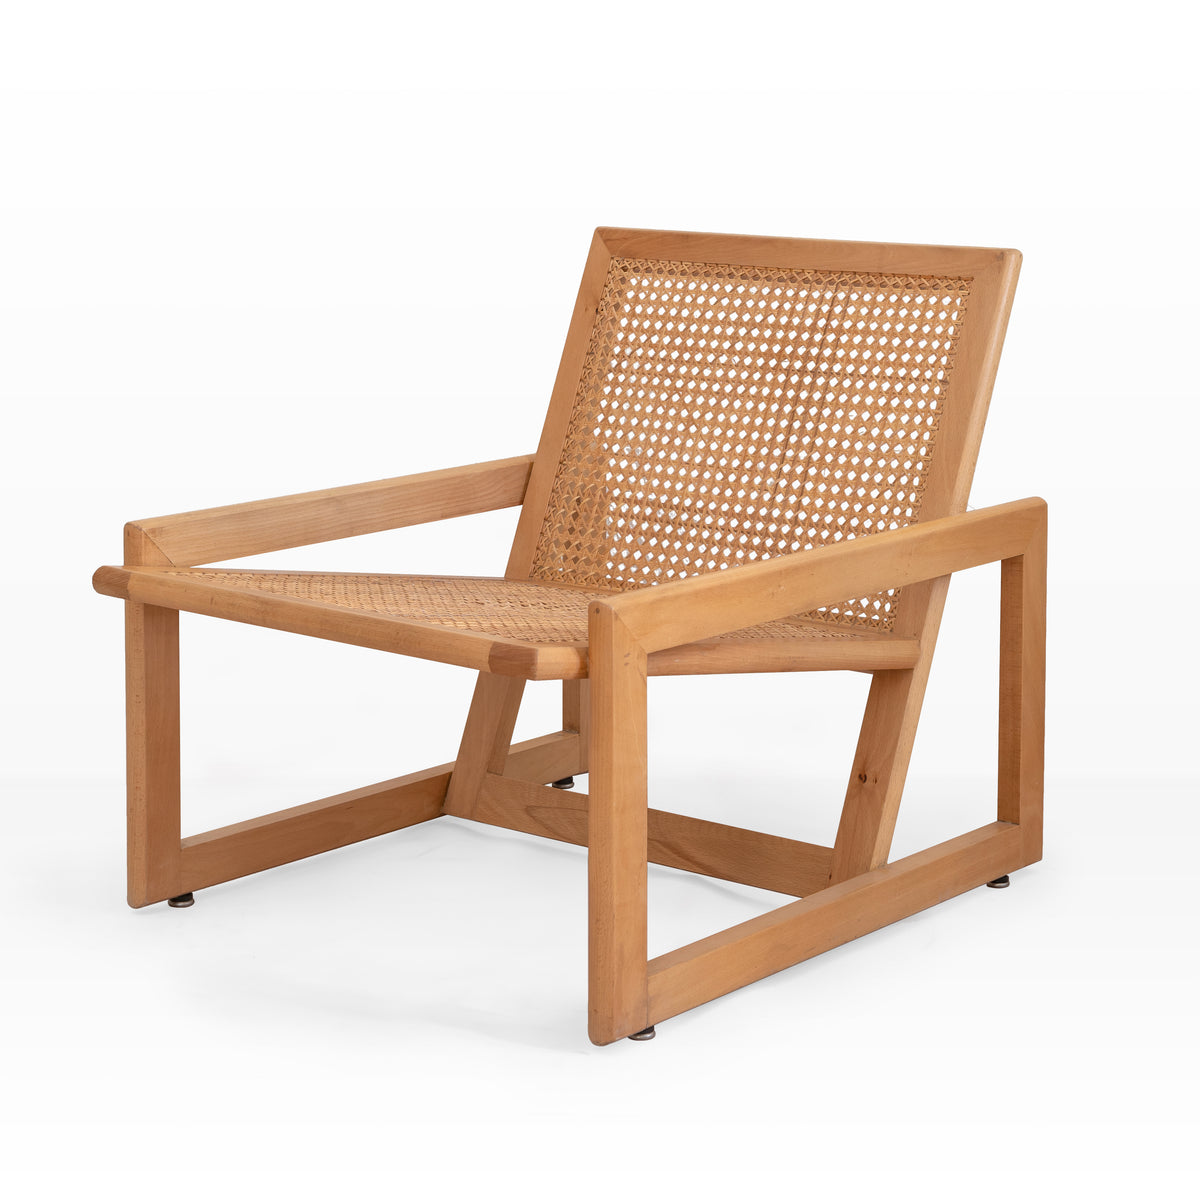 Sunken Lounge Chair - Studio 39- The Mob Collective